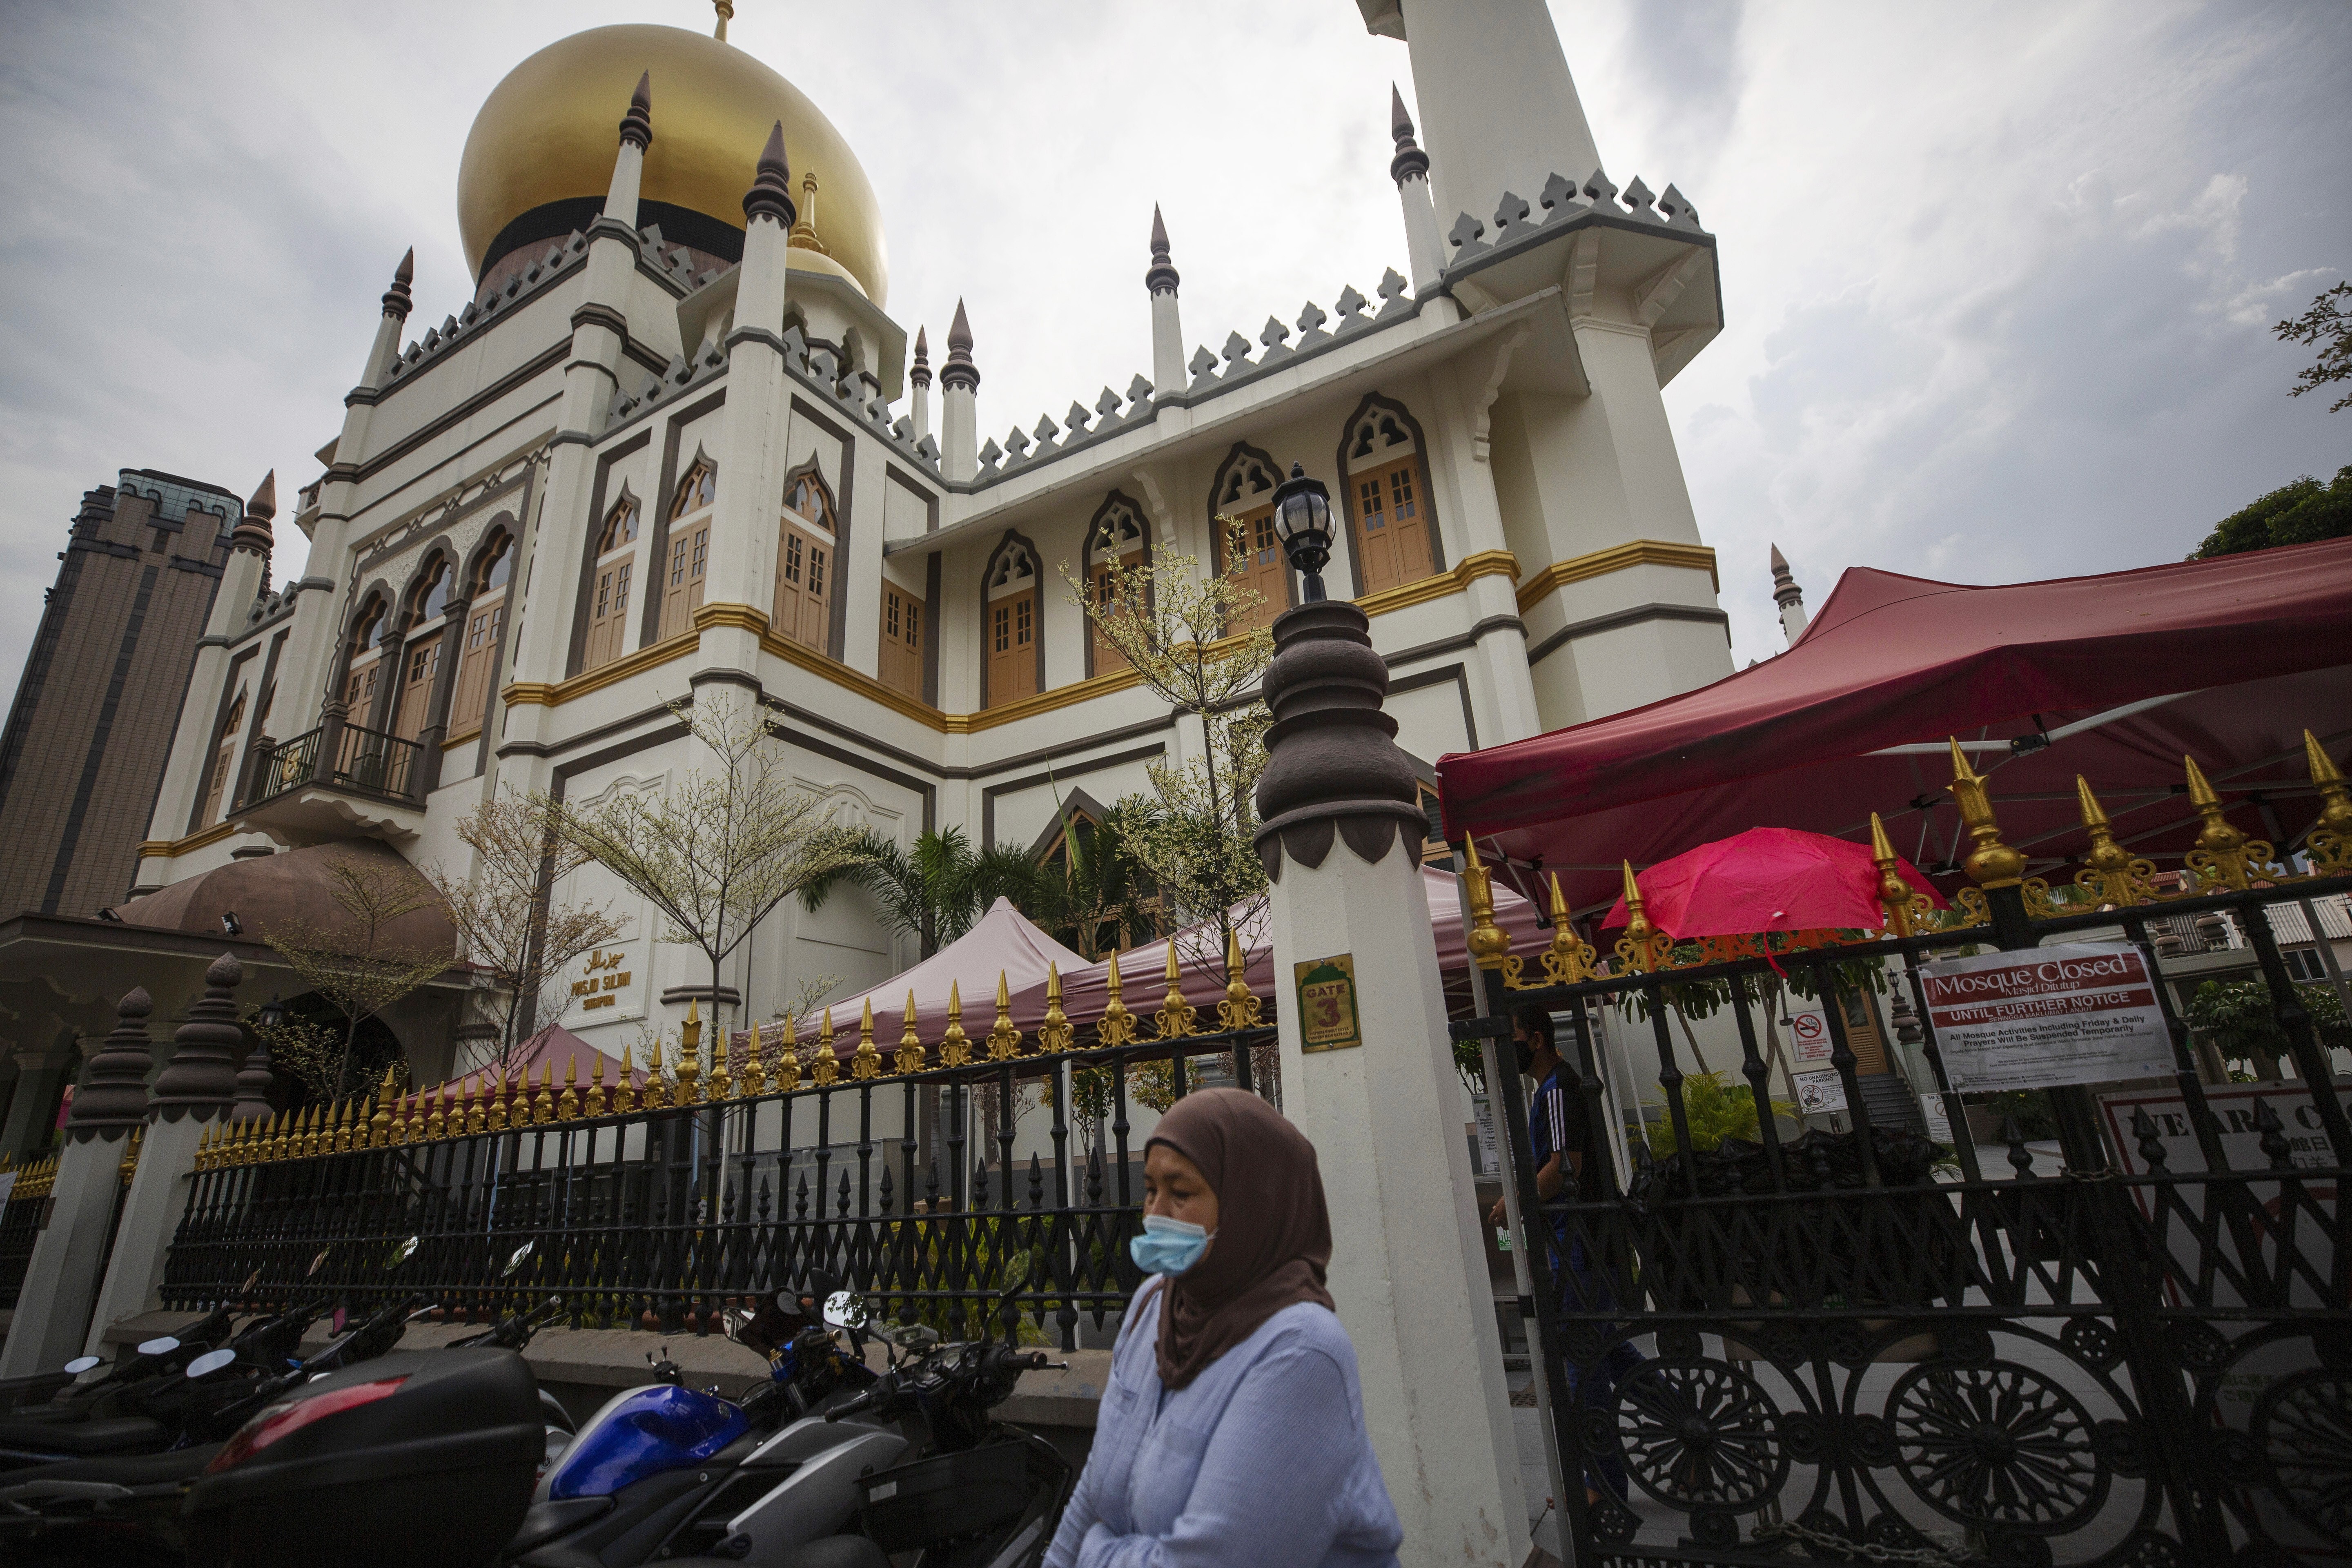 The Sultan Mosque in Singapore’s Kampong Glam district. File photo: EPA-EFE